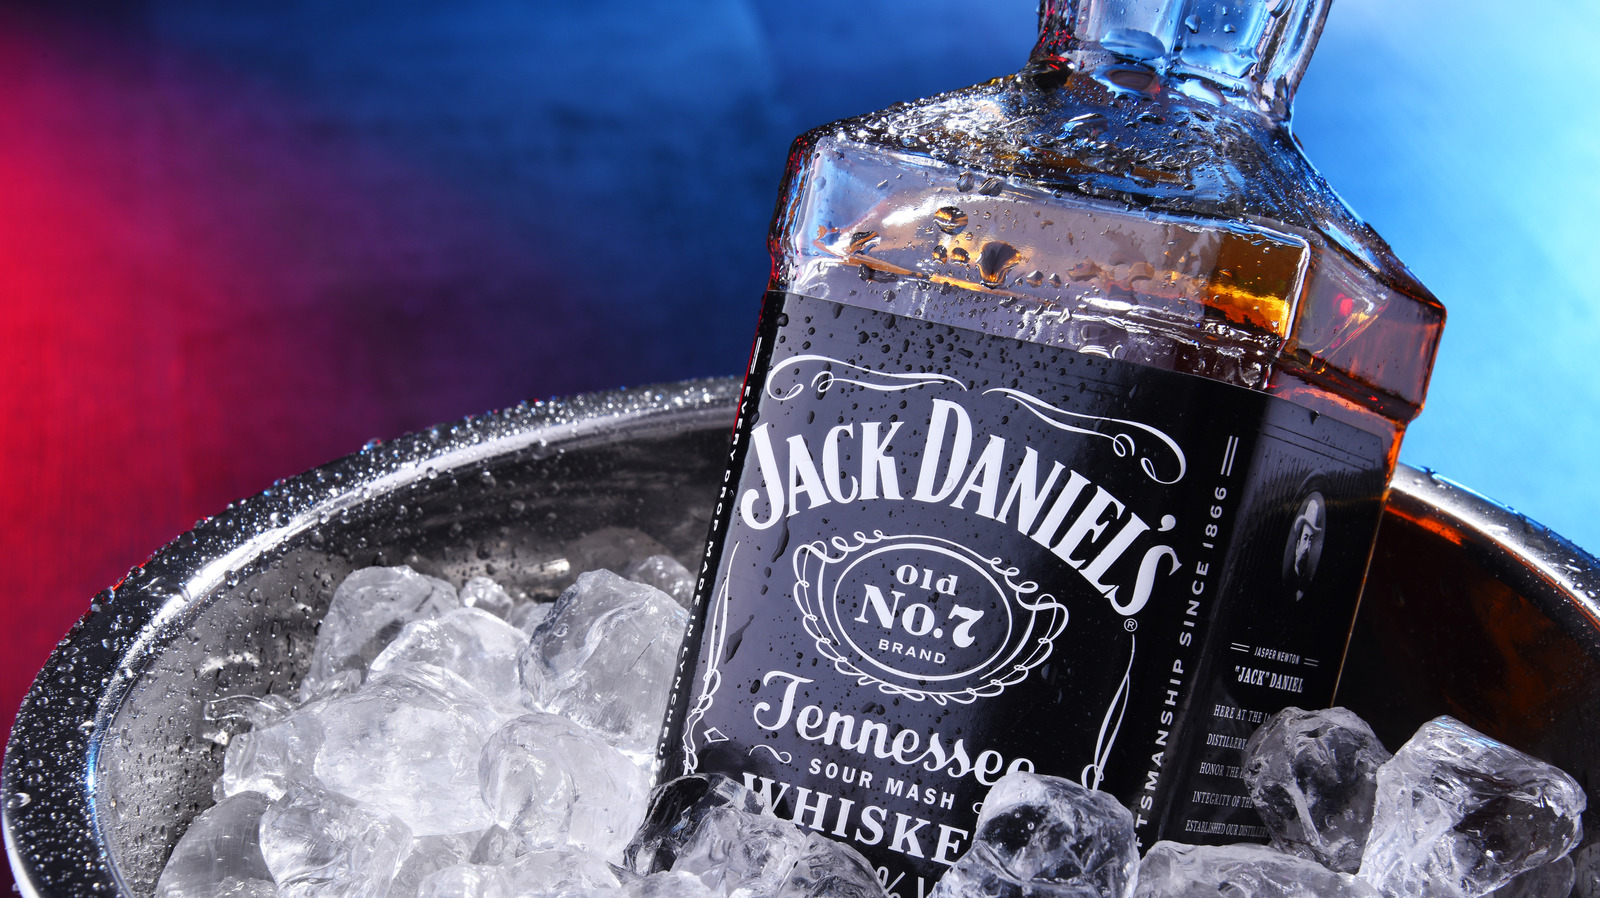 10 Different Jack Daniel's Expressions - WhiskyFlavour